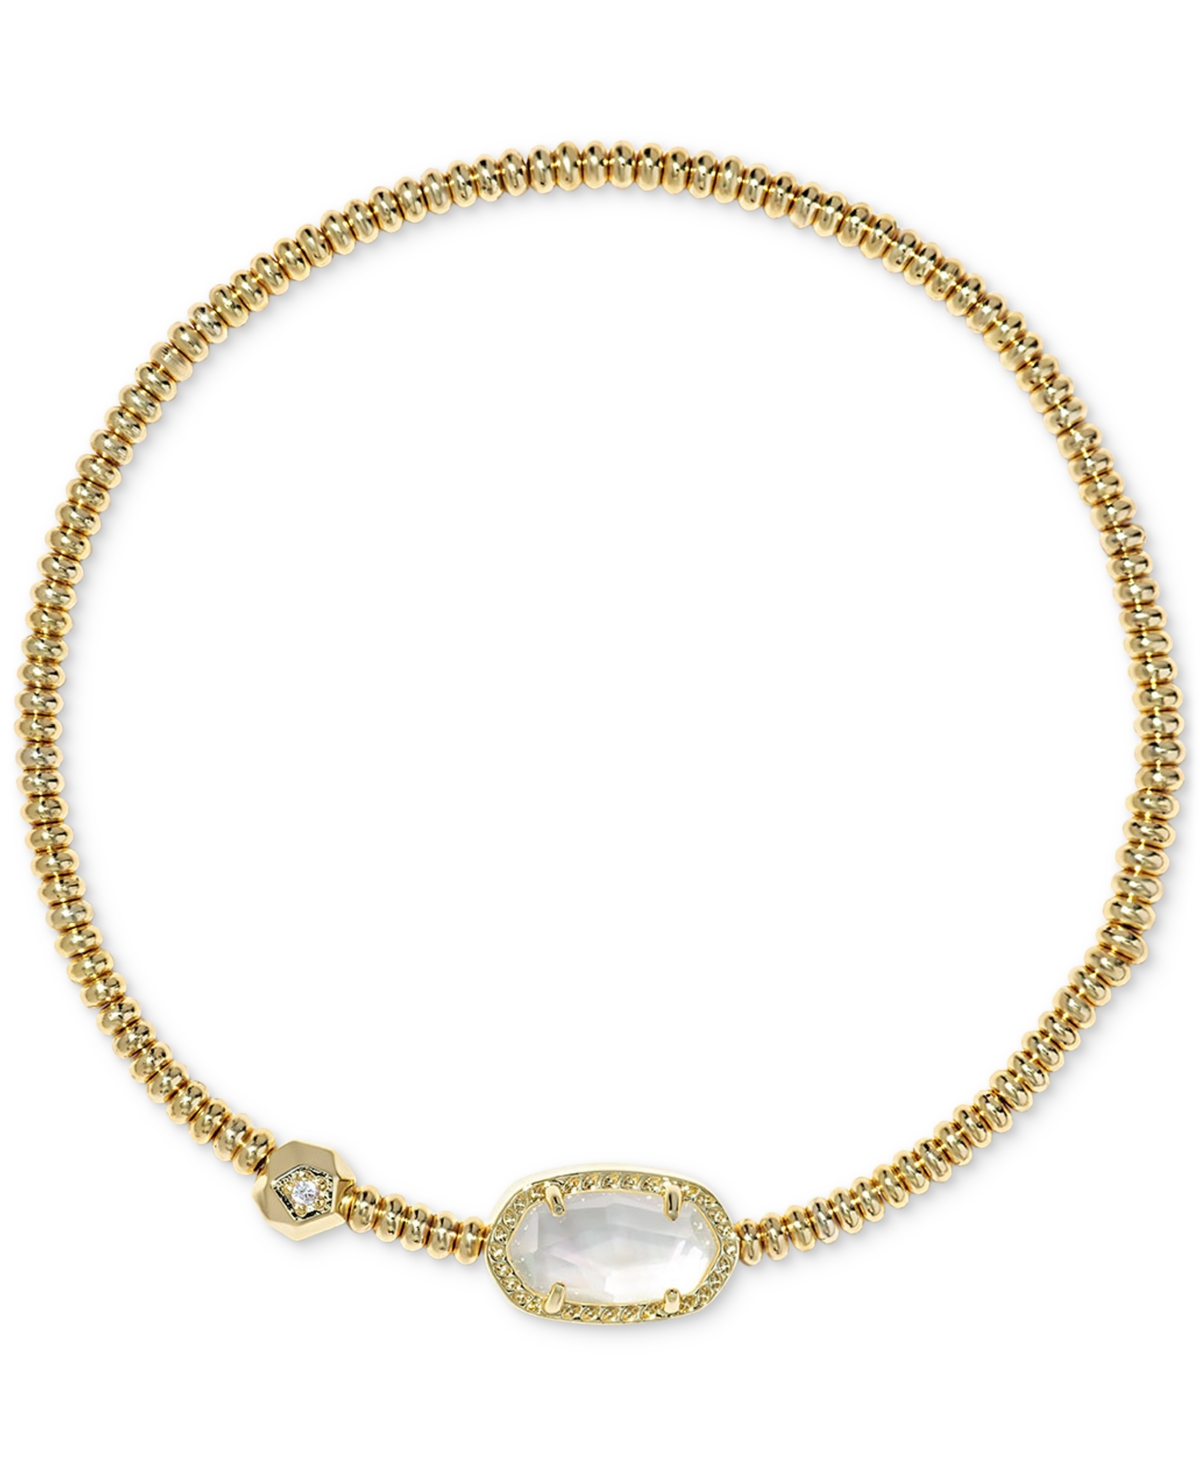 Kendra Scott 14k Gold-plated Gemstone Beaded Stretch Bracelet In Gold Ivory Mother Of Pearl